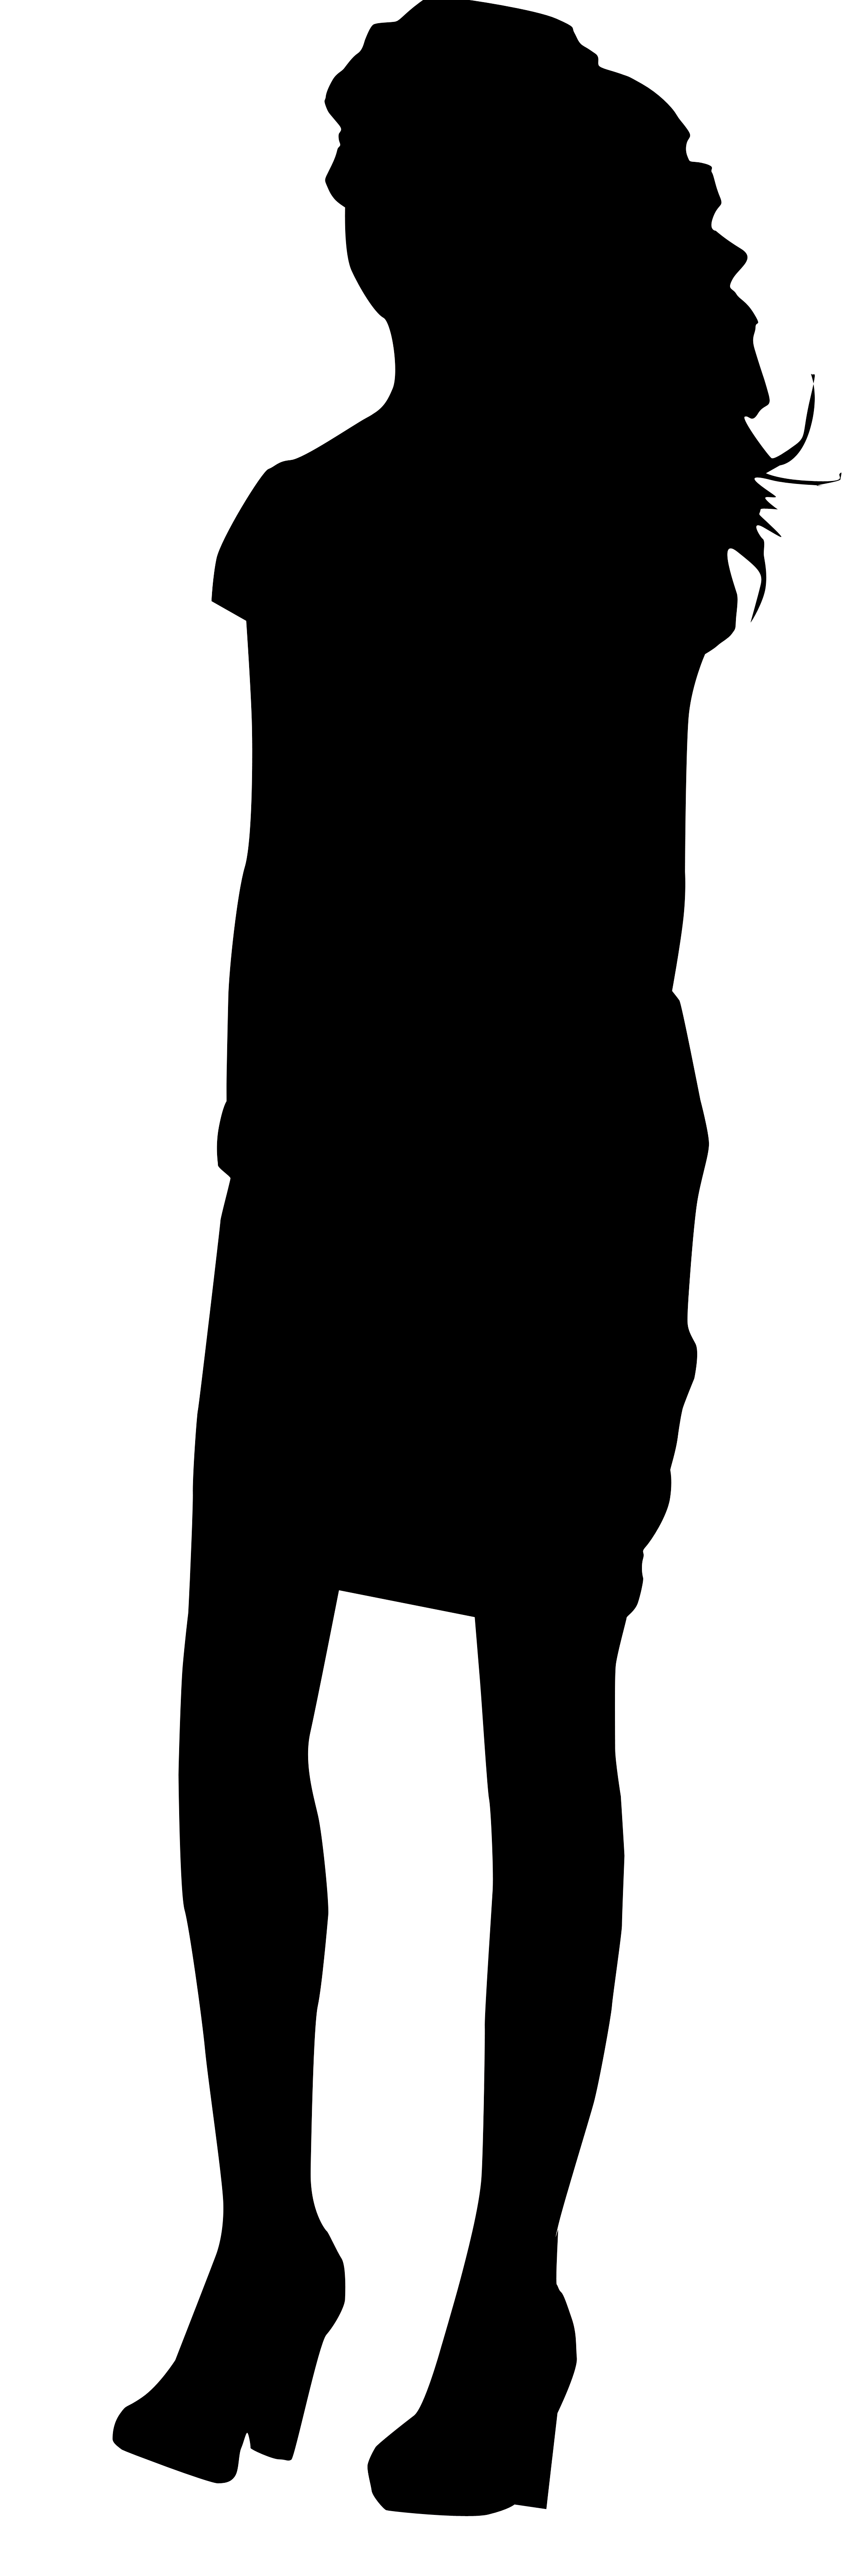 Woman Standing Silhouette - Clipart library